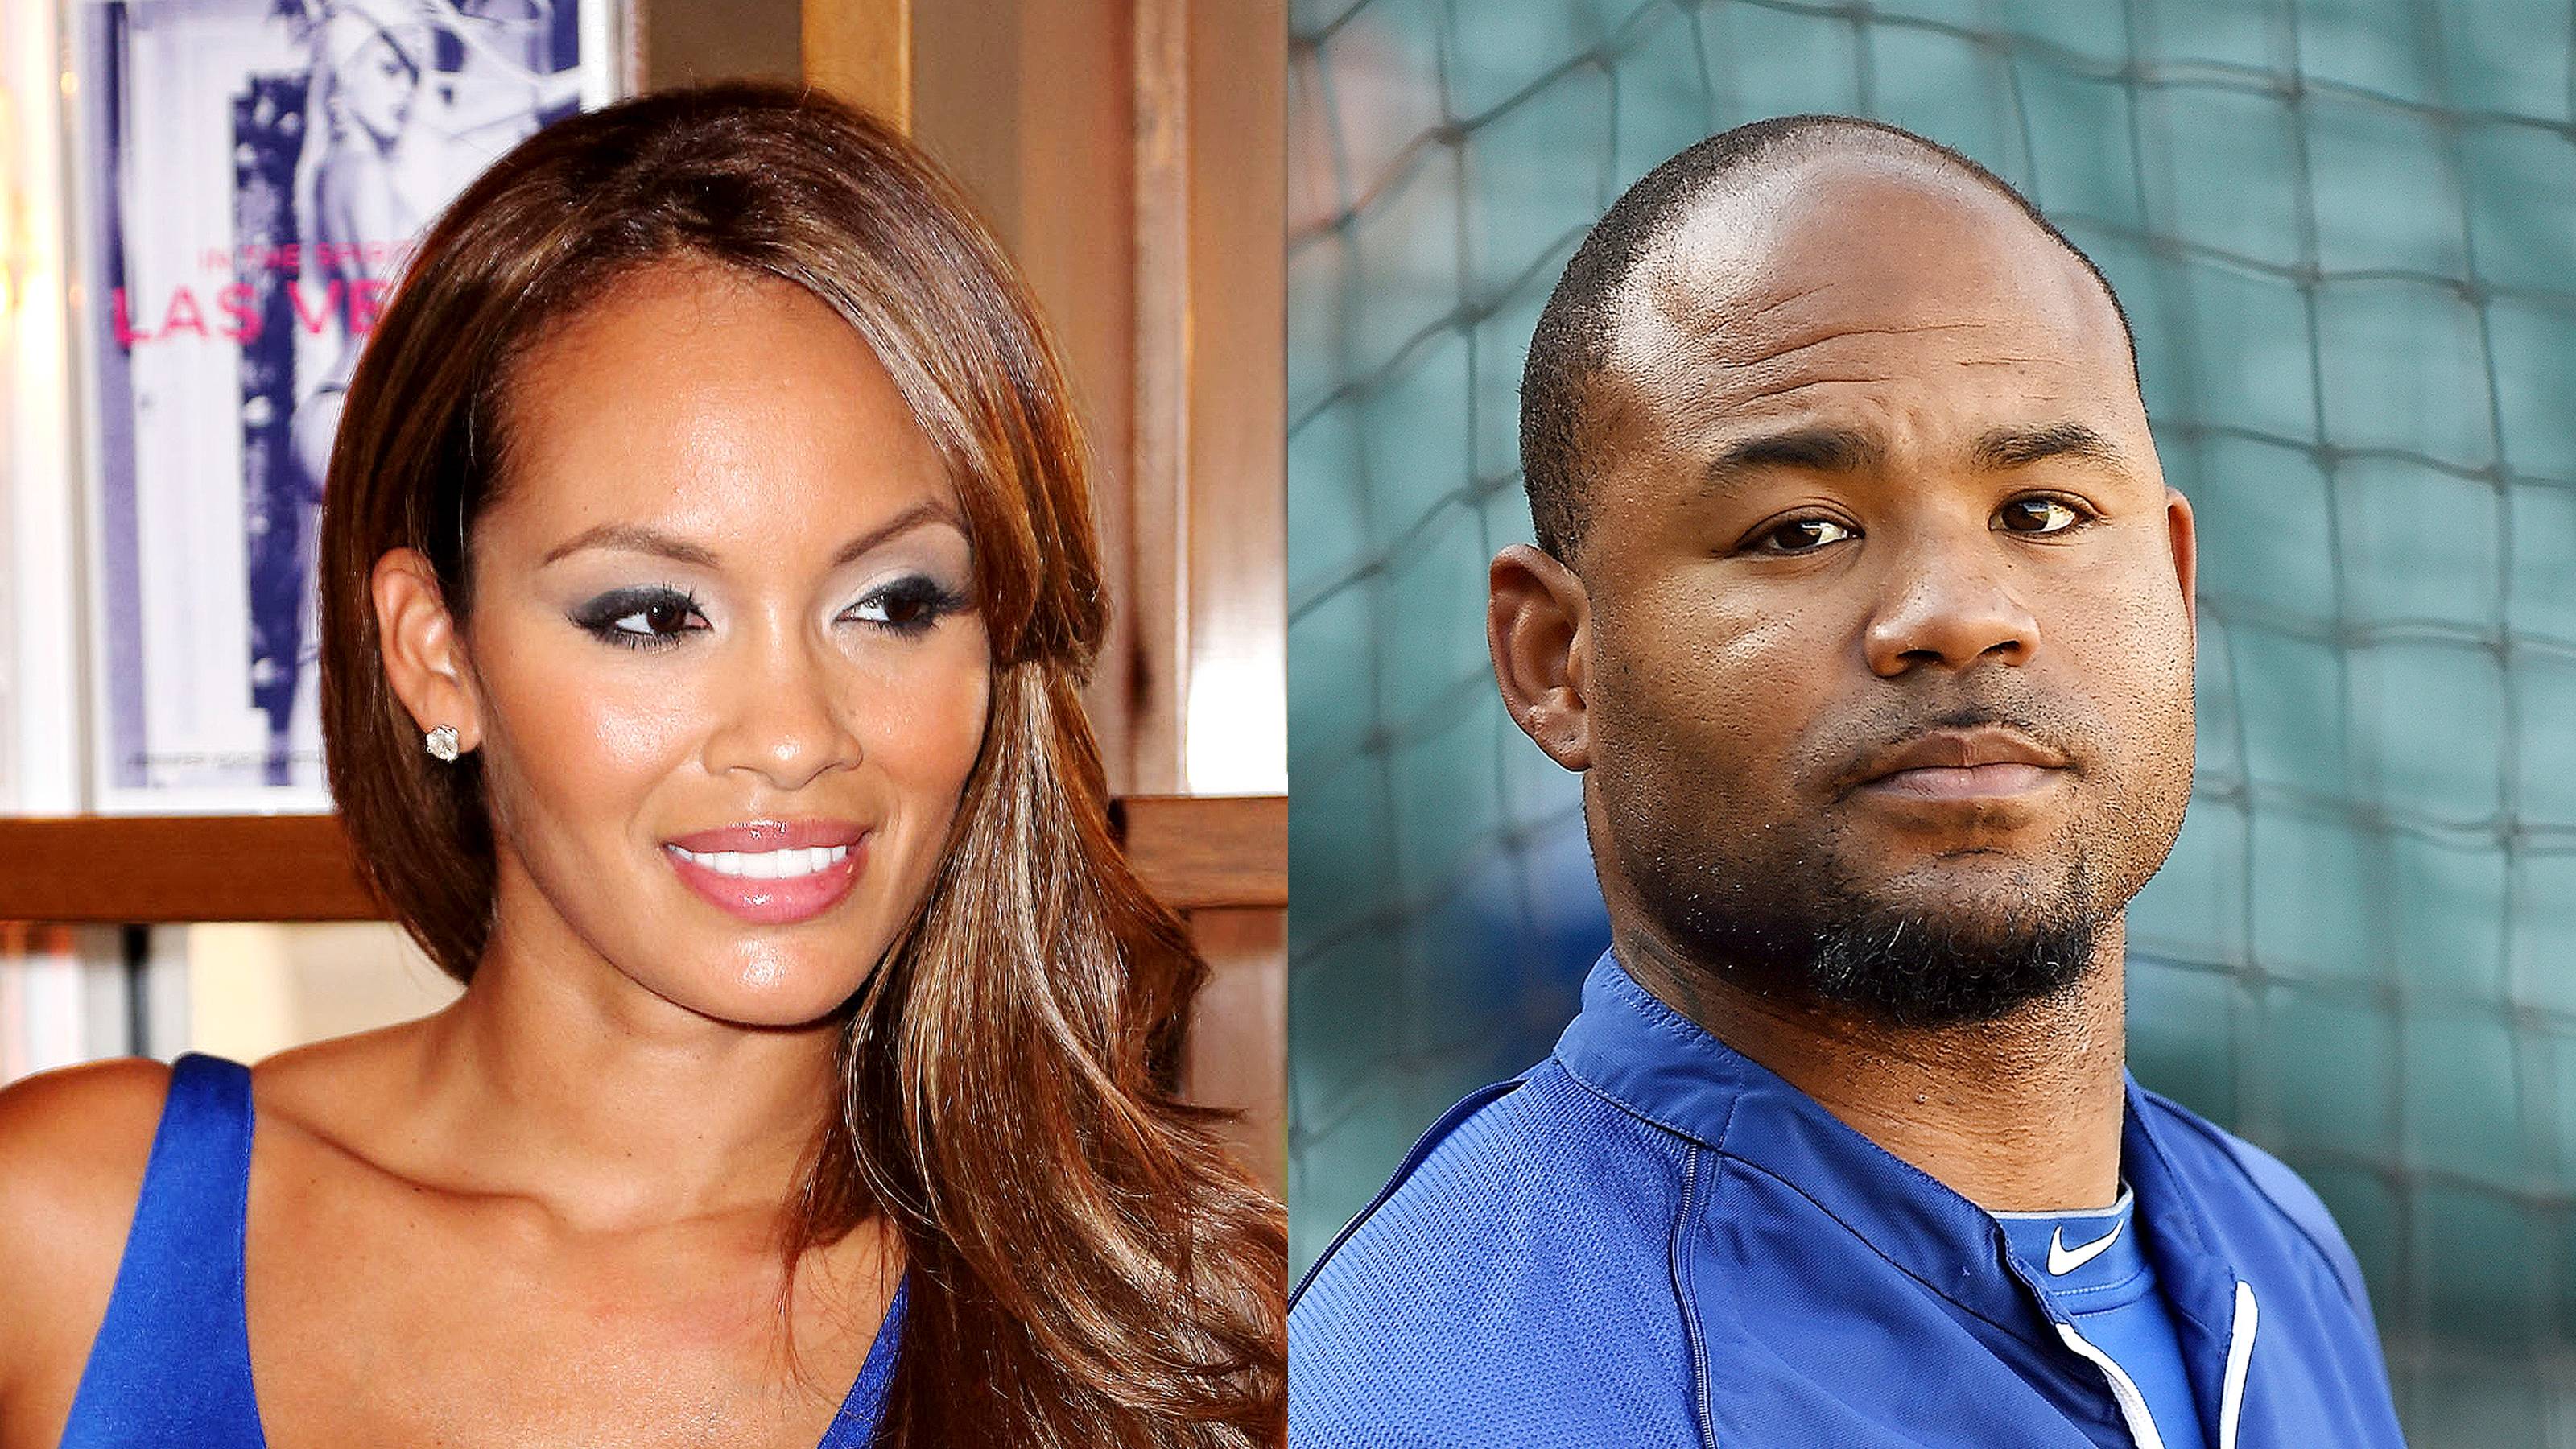 The REAL REASON Carl Crawford REFUSED to Marry Evelyn Lozada